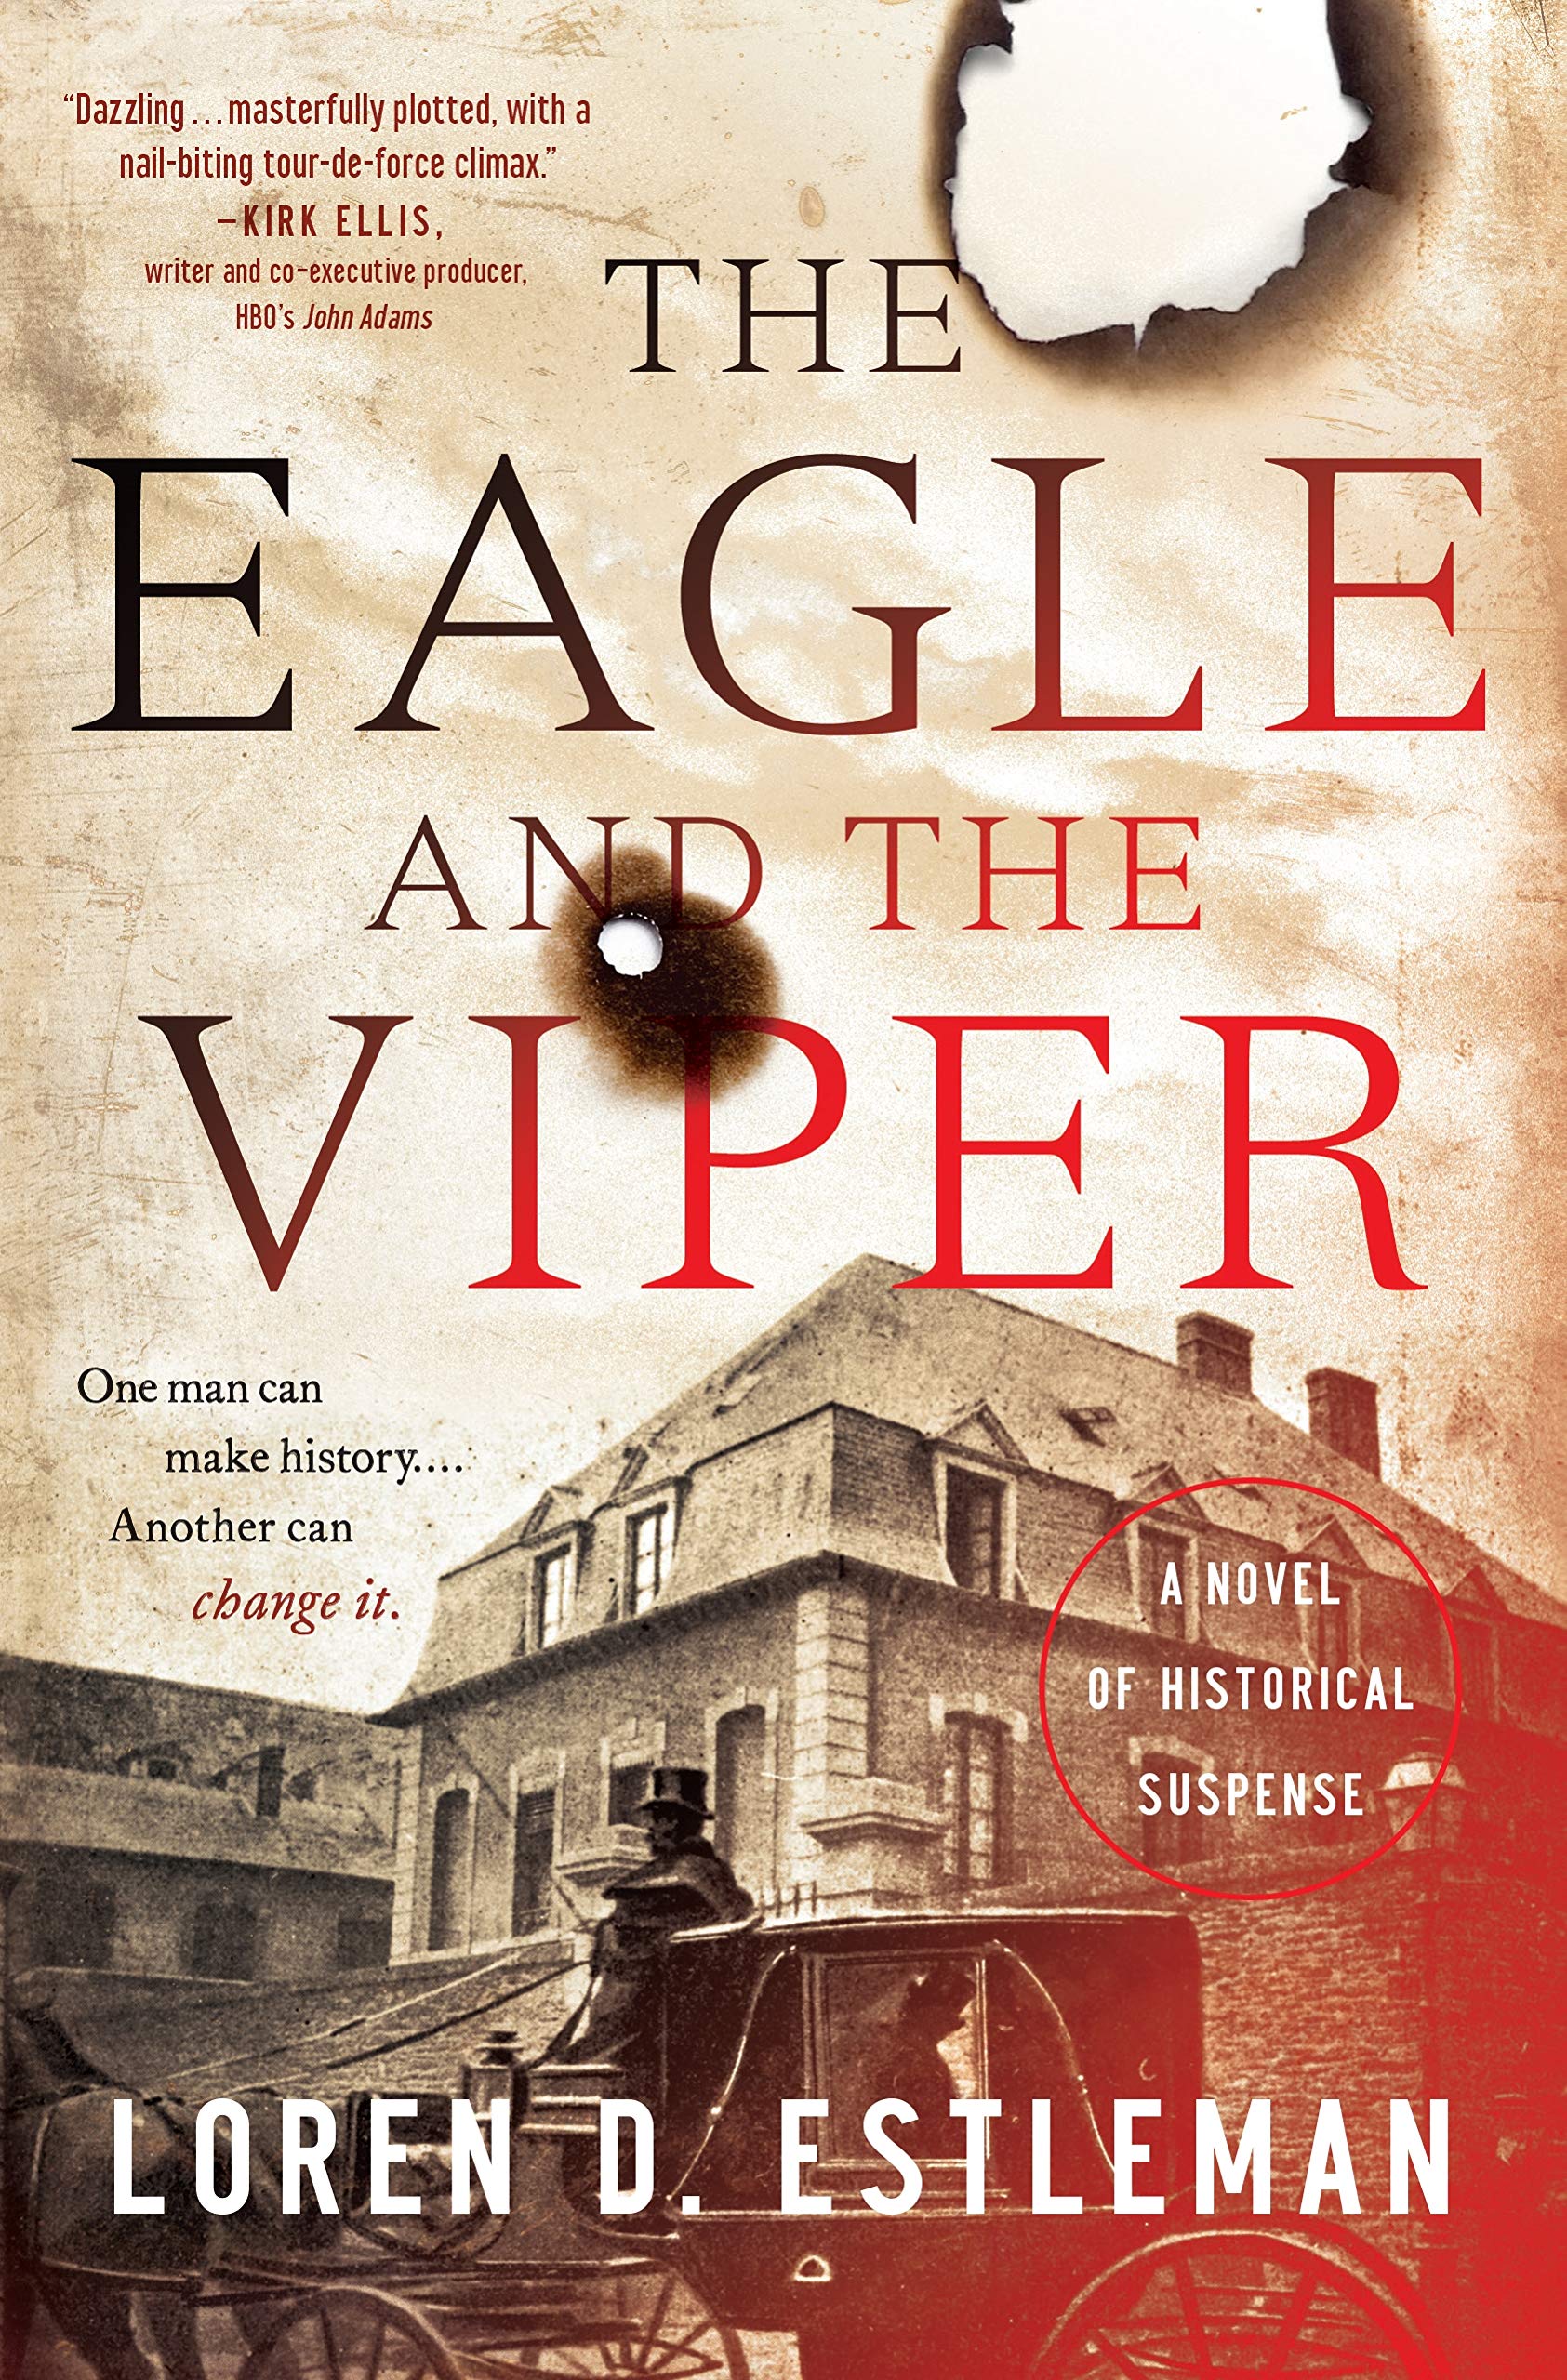 Image for "The Eagle and the Viper"